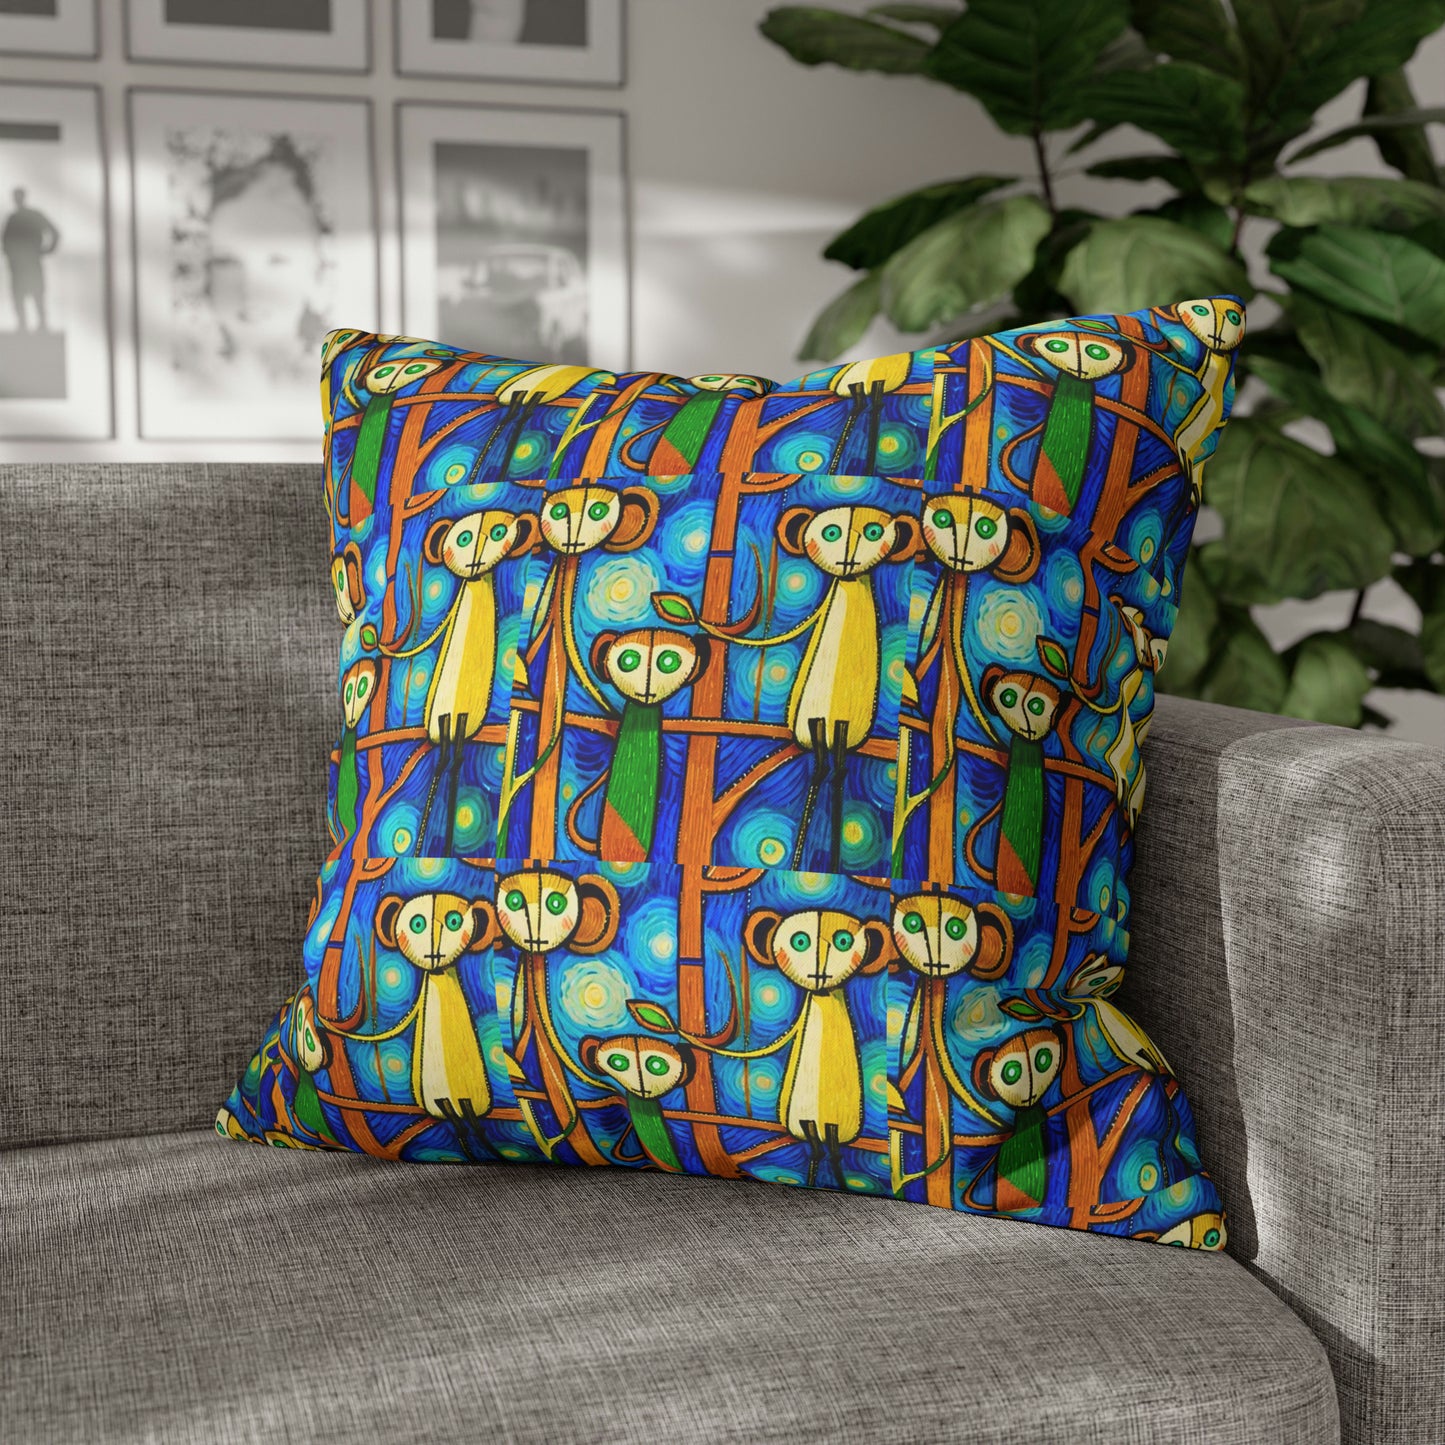 Rain Forest Monkey Family Children's Room Decorative Square Poly Canvas Pillow Cover